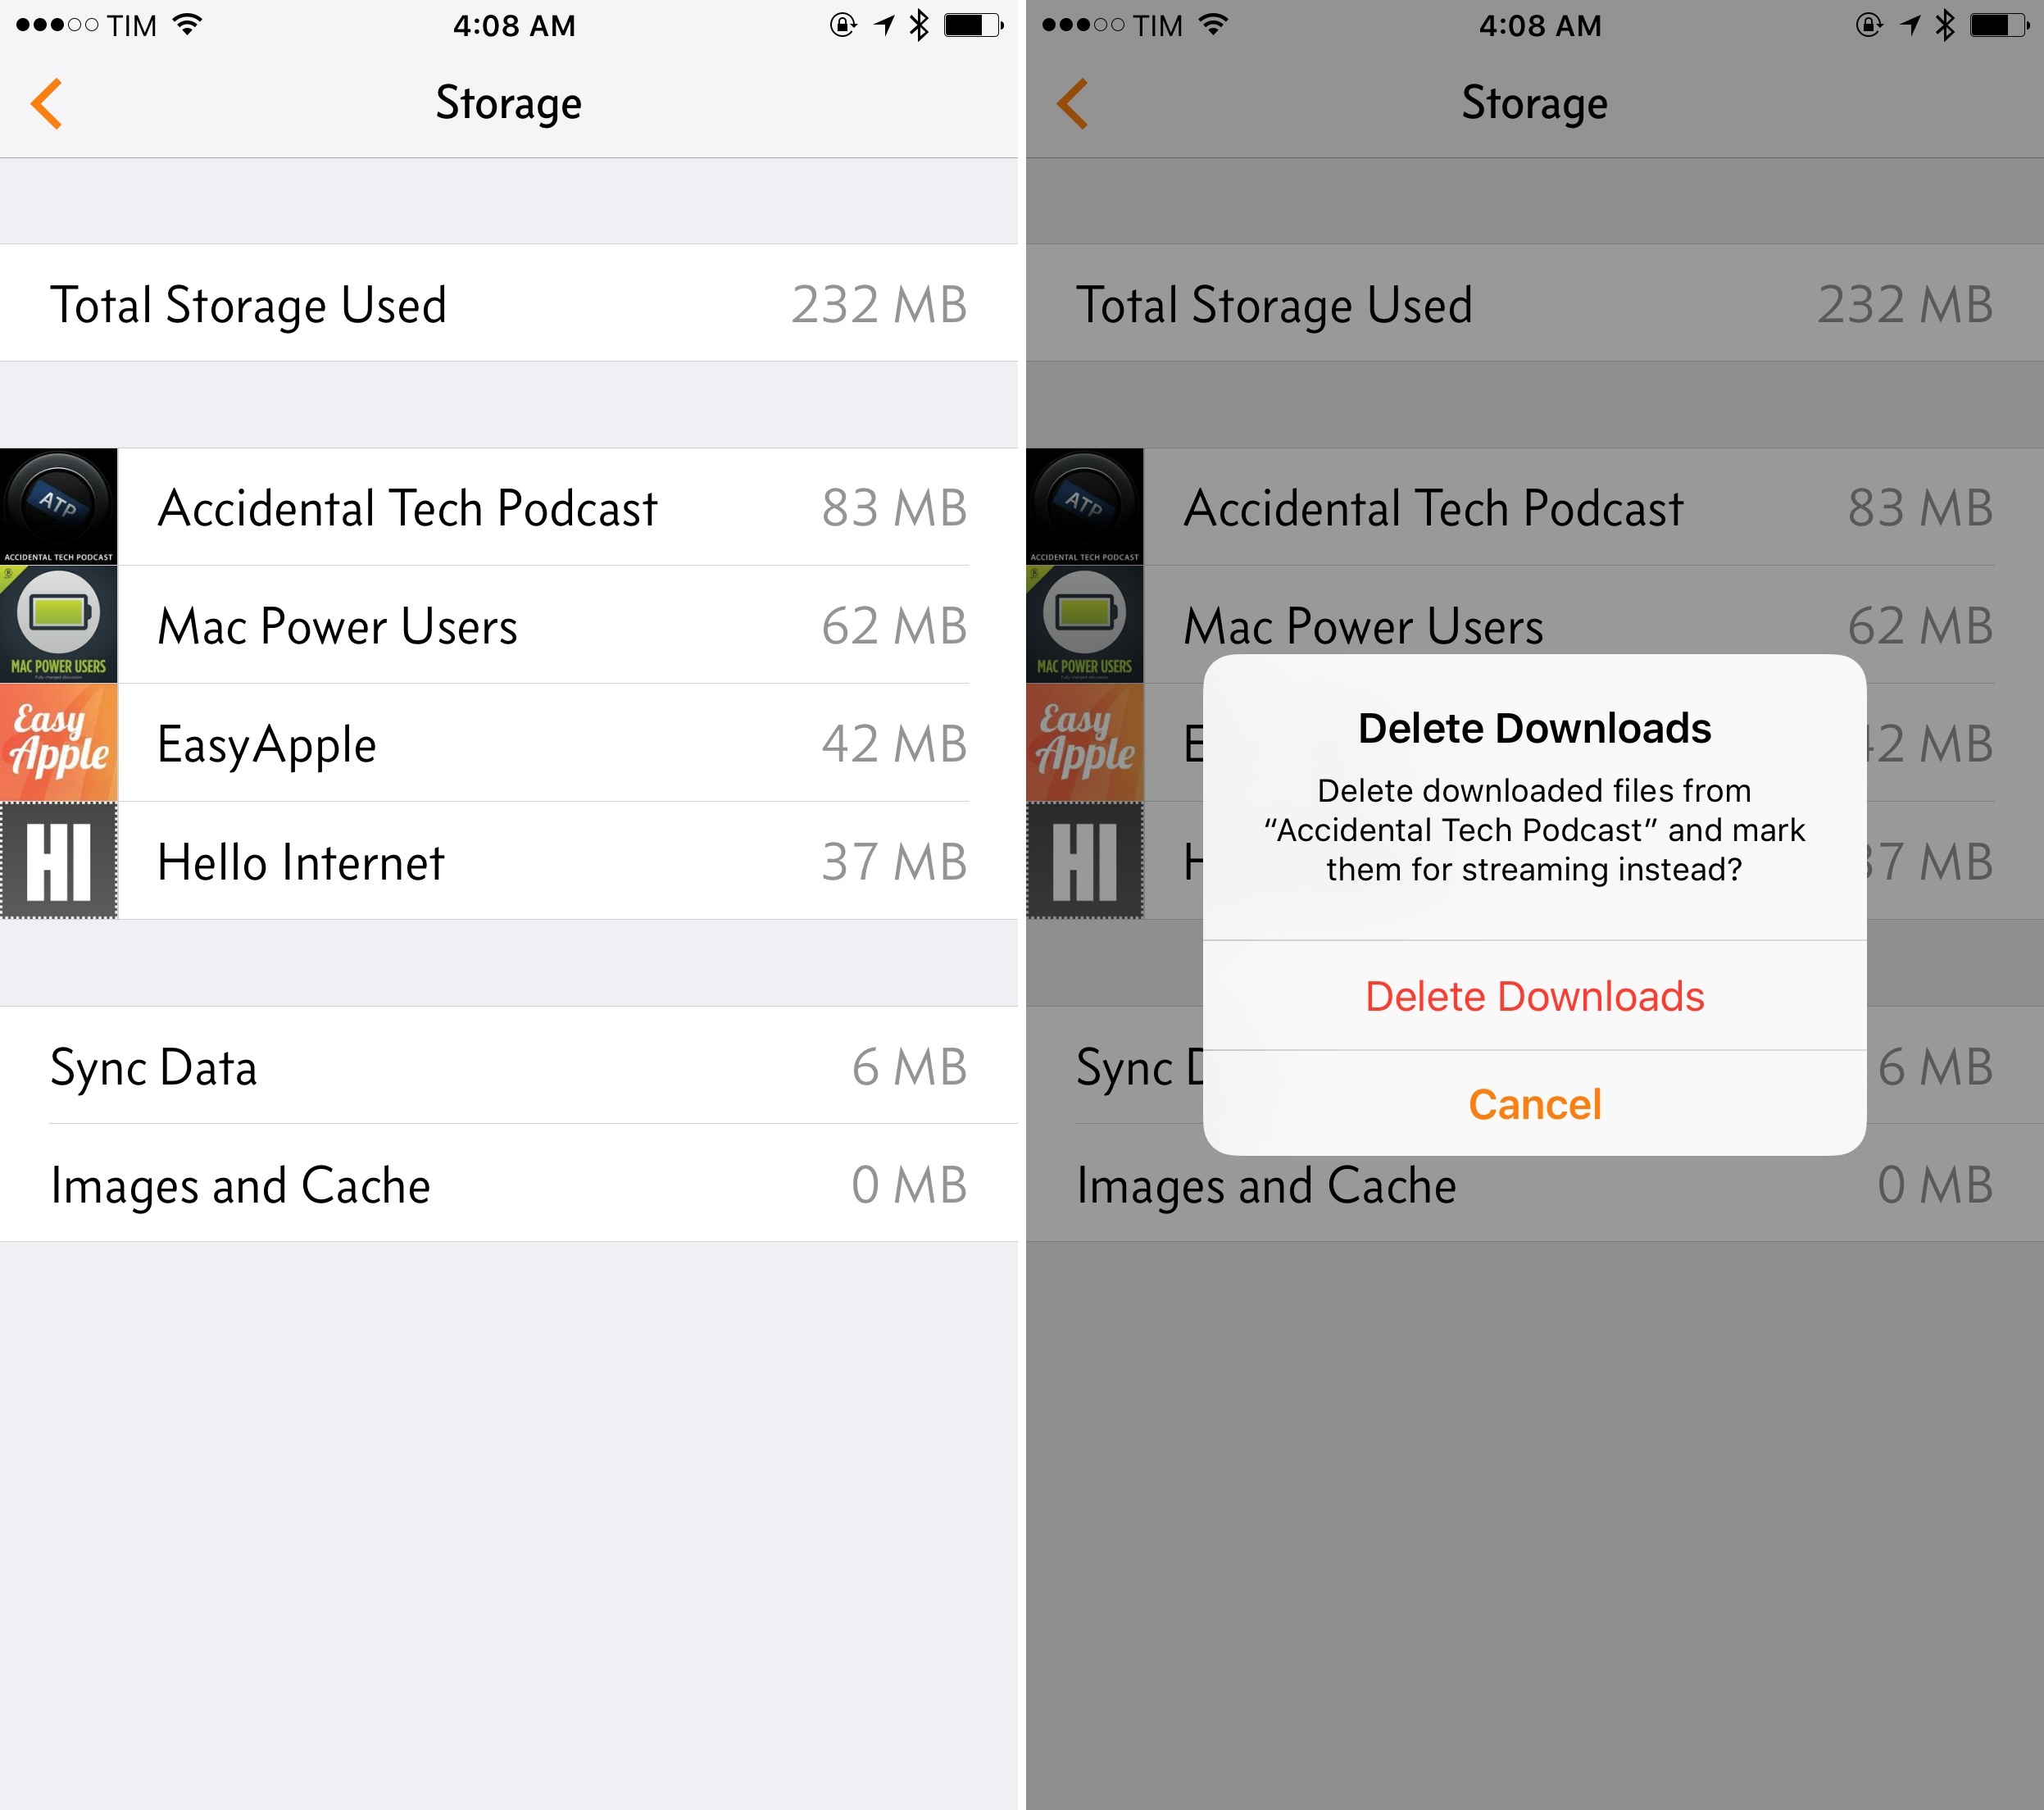 I also appreciate the new storage options to see which shows are using storage with downloads on my device.